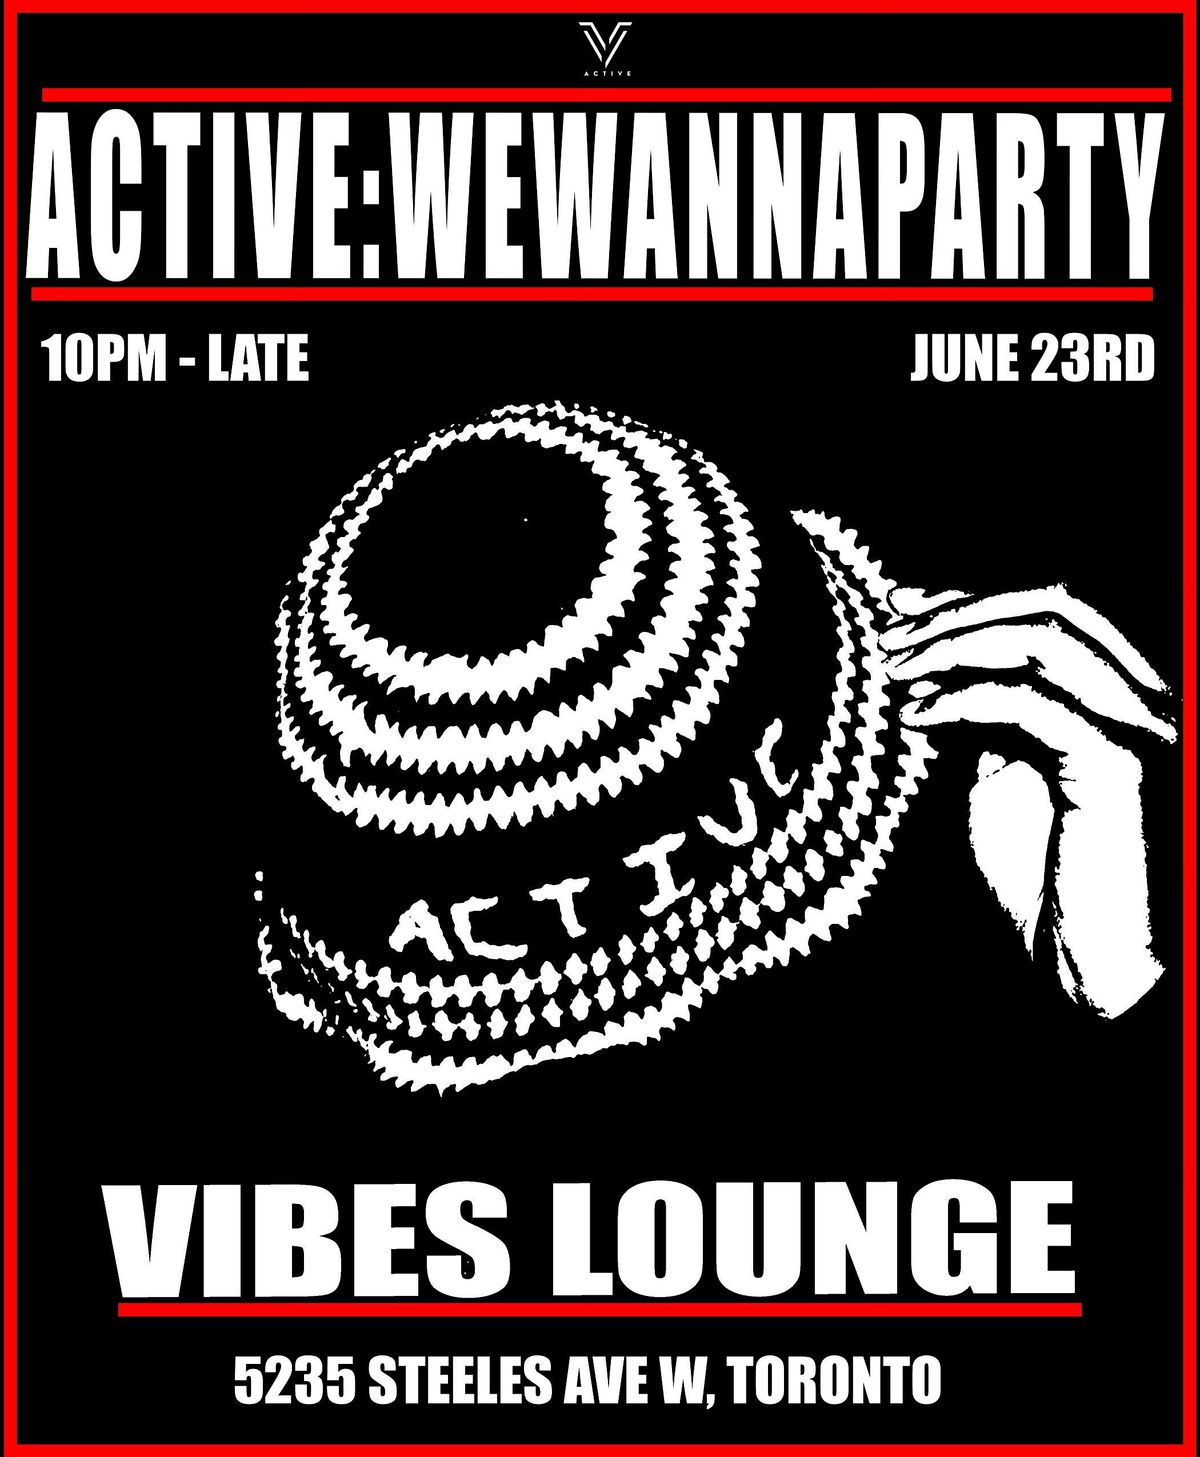 ACTIVE: WE WANNA PARTY!!